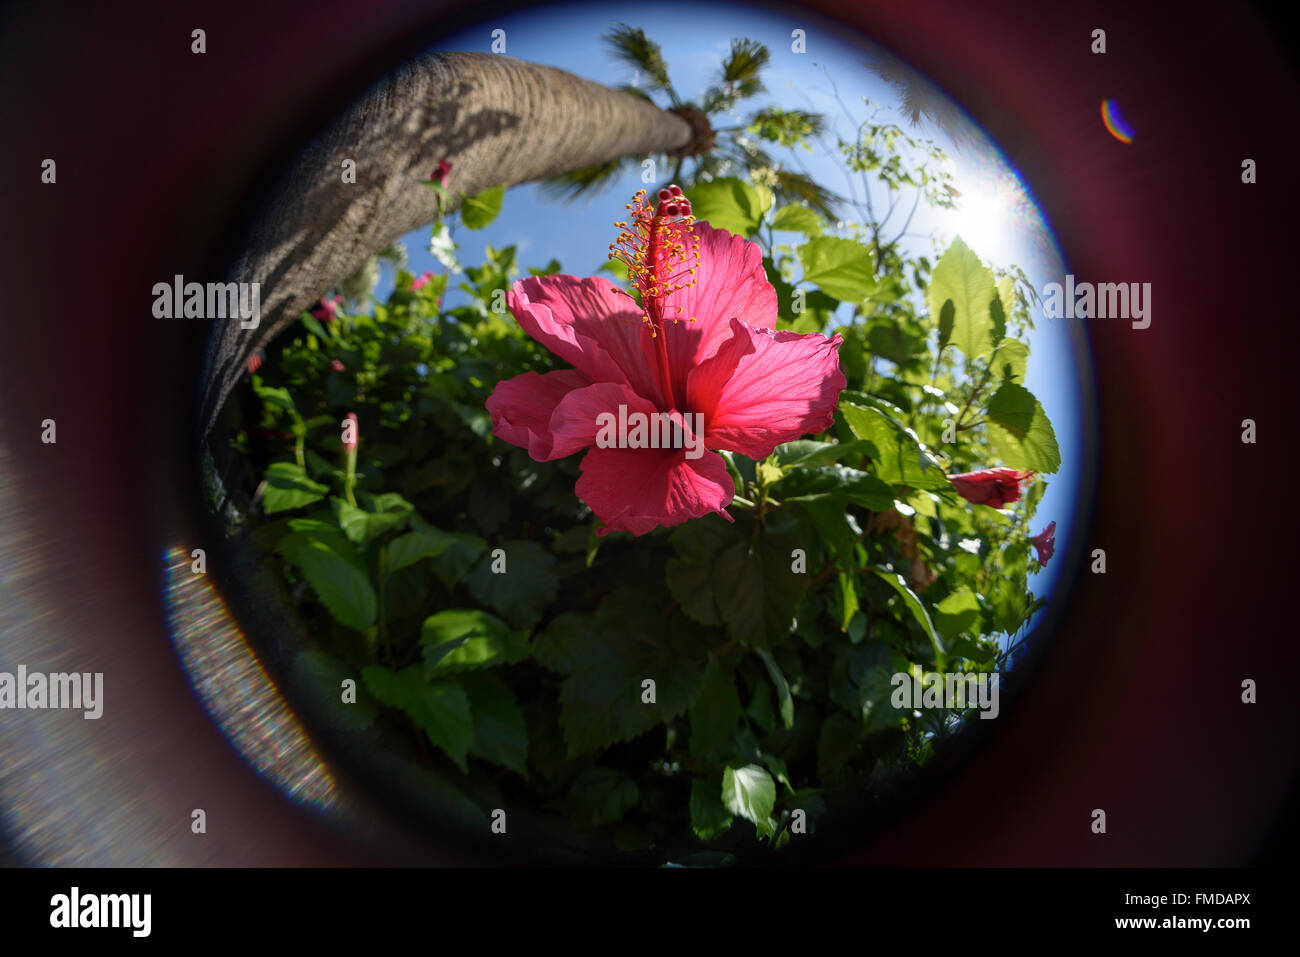 Fish-eye view up close of pink Hibiscus, palm tree under blue sky with sun. Stock Photo